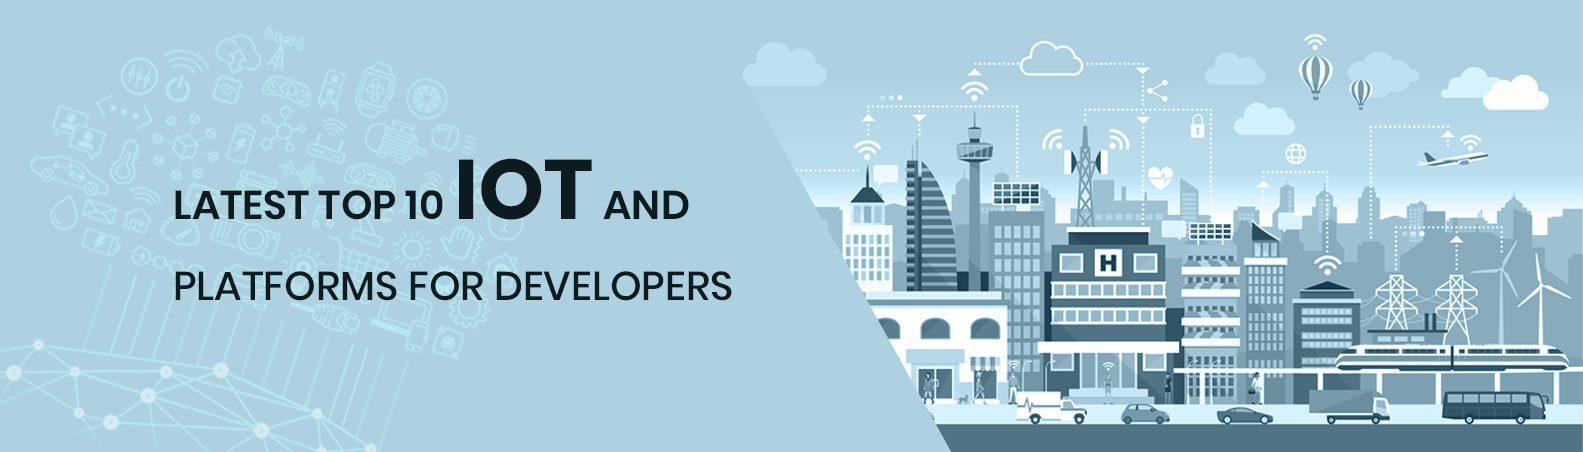 Latest Top 10 IoT and Platforms for Developers